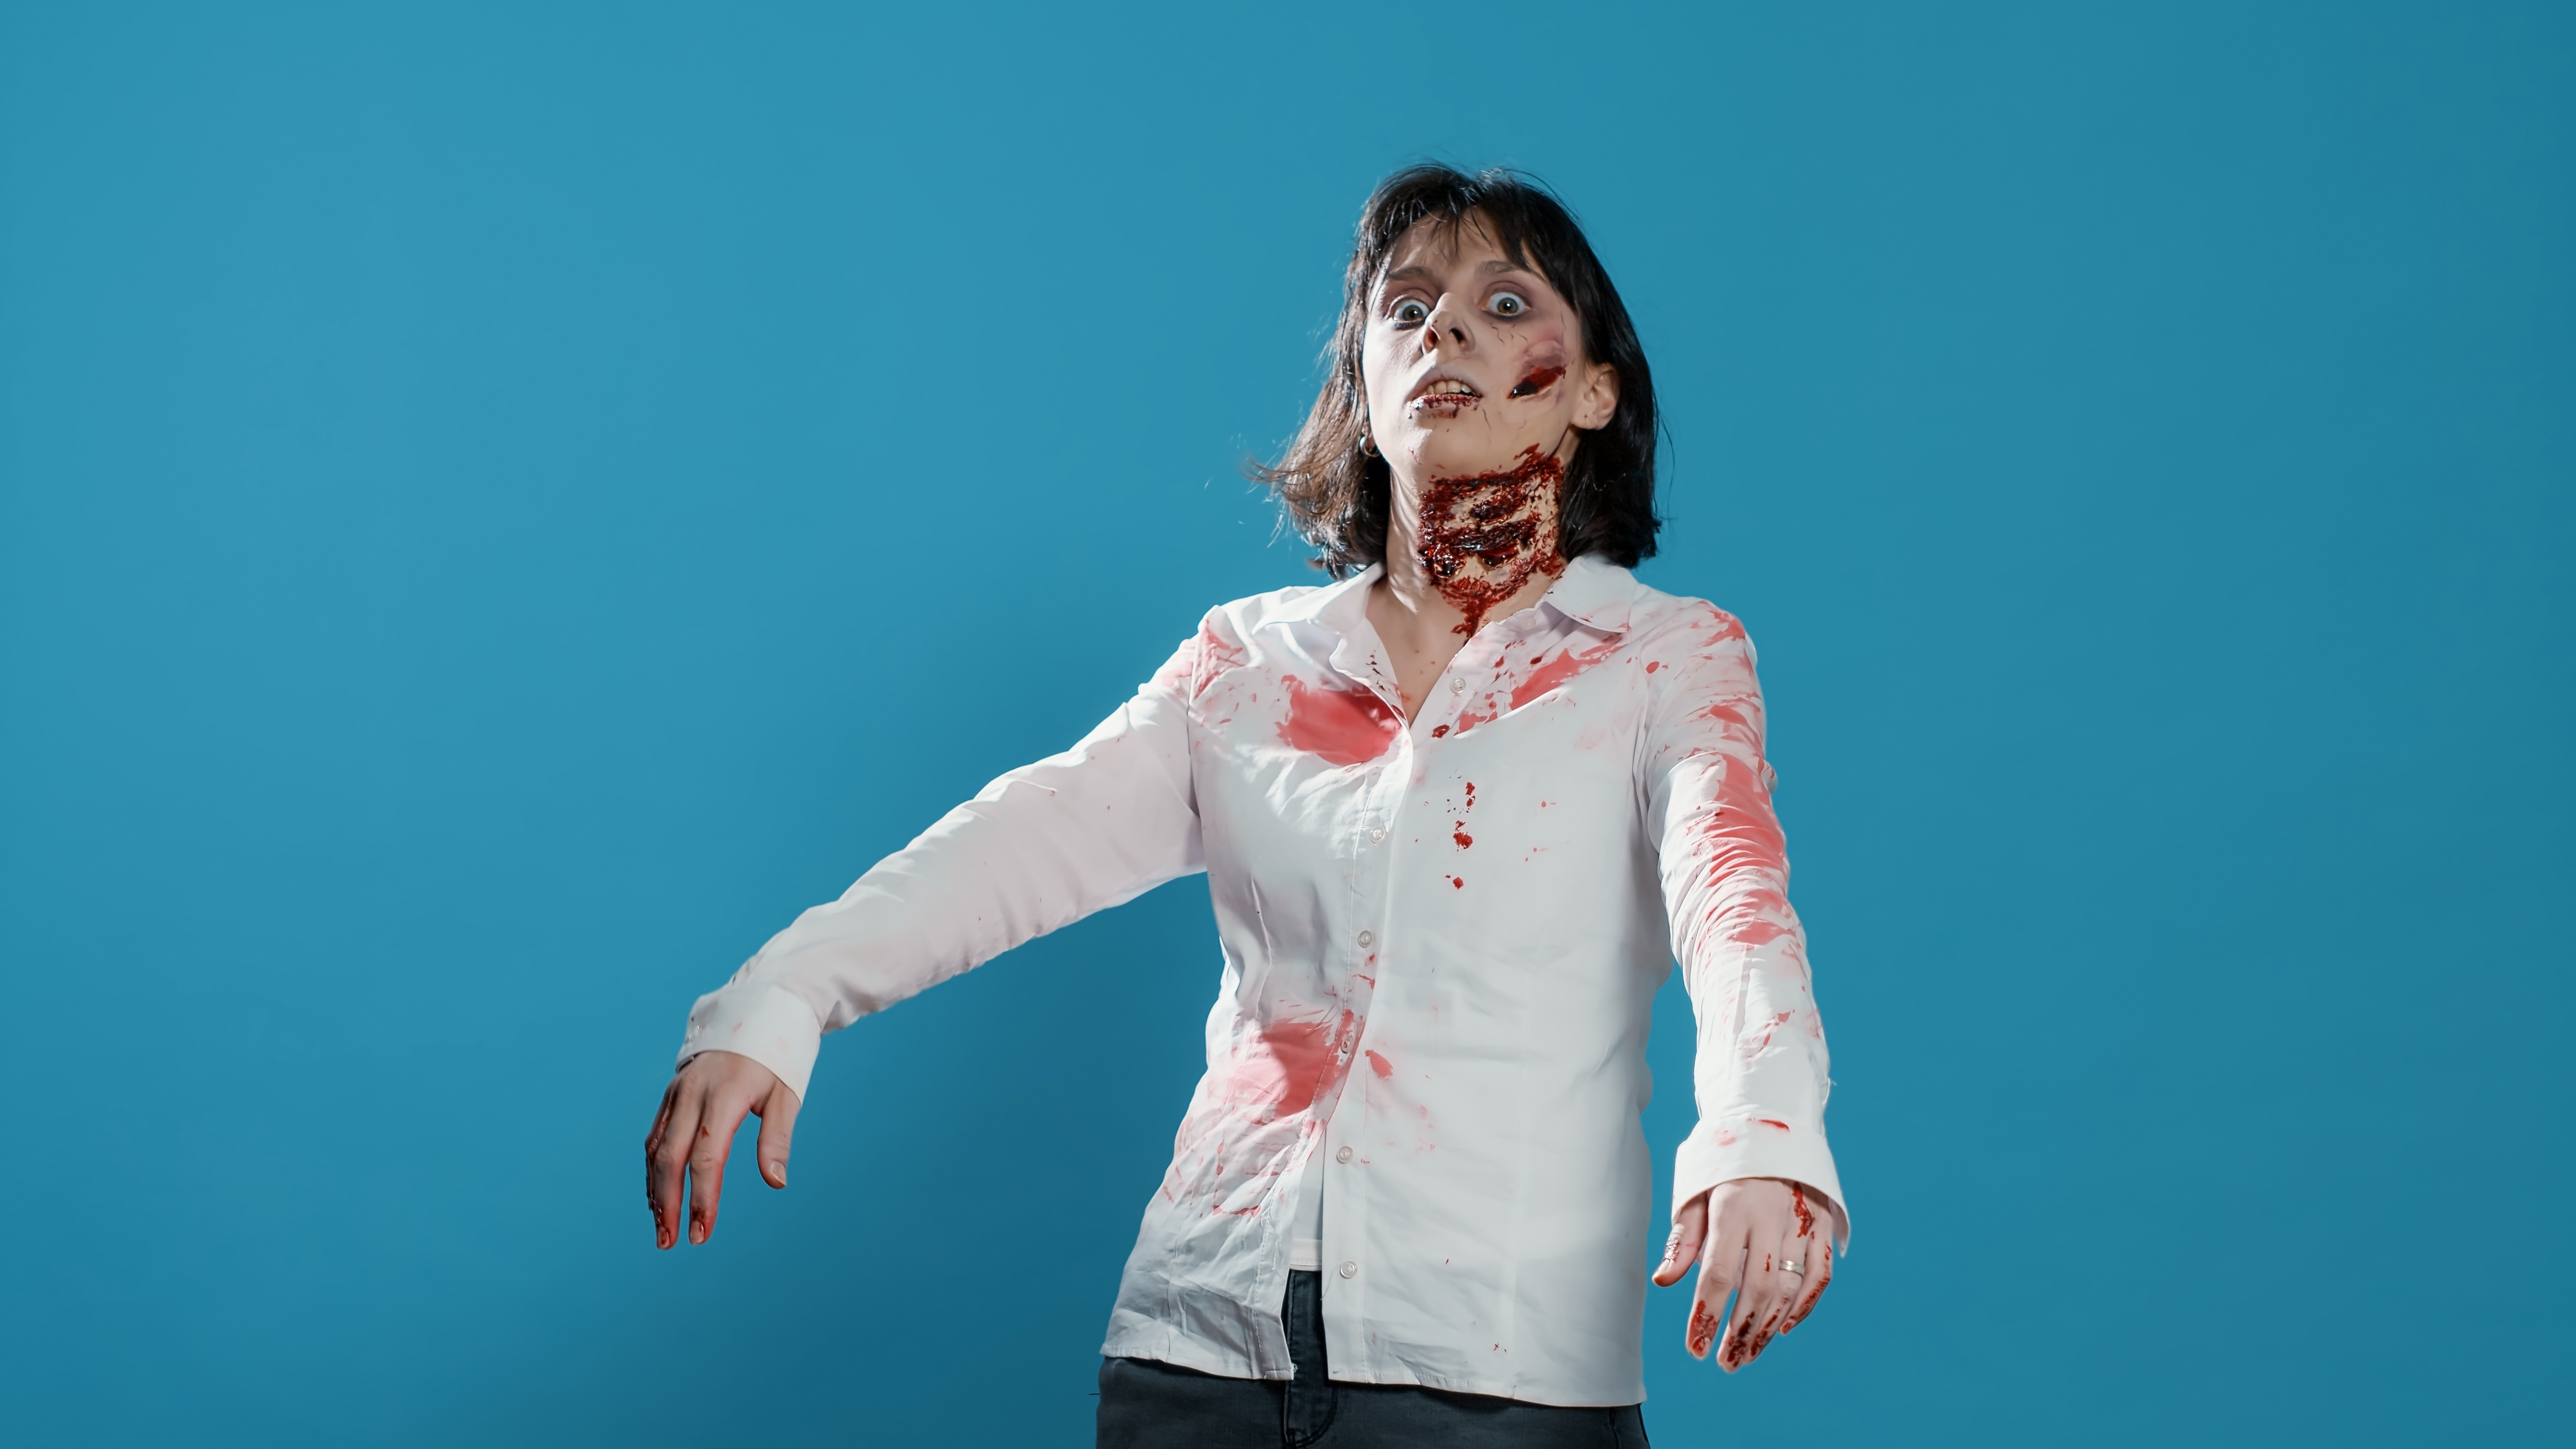 A woman dressed and posing as a zombie with blood stains on her shirt and a wound in her neck